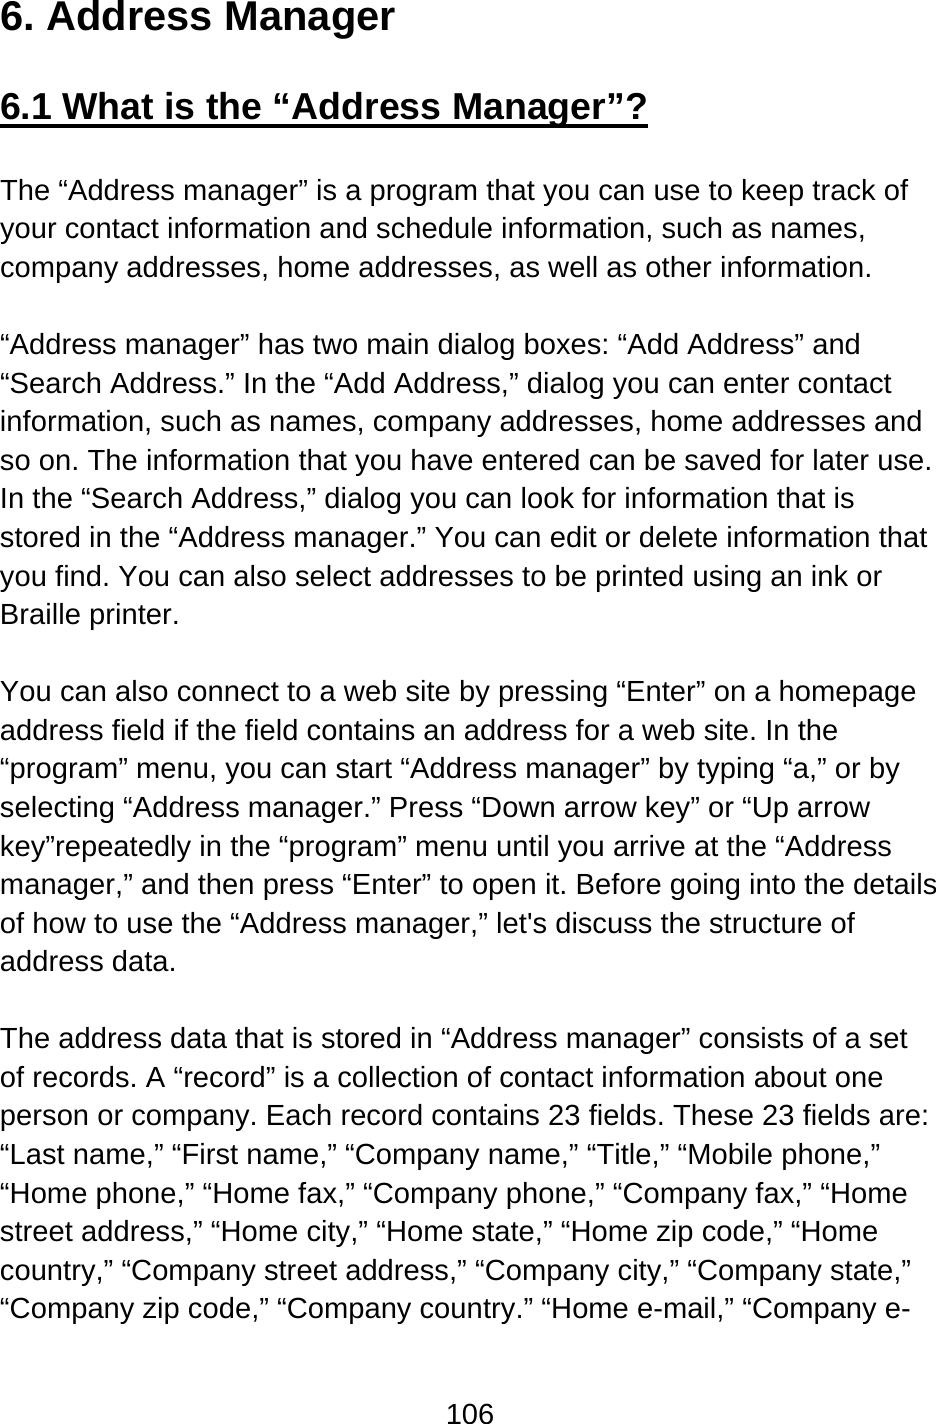 106  6. Address Manager  6.1 What is the “Address Manager”?  The “Address manager” is a program that you can use to keep track of your contact information and schedule information, such as names, company addresses, home addresses, as well as other information.  “Address manager” has two main dialog boxes: “Add Address” and “Search Address.” In the “Add Address,” dialog you can enter contact information, such as names, company addresses, home addresses and so on. The information that you have entered can be saved for later use.   In the “Search Address,” dialog you can look for information that is stored in the “Address manager.” You can edit or delete information that you find. You can also select addresses to be printed using an ink or Braille printer.  You can also connect to a web site by pressing “Enter” on a homepage address field if the field contains an address for a web site. In the “program” menu, you can start “Address manager” by typing “a,” or by selecting “Address manager.” Press “Down arrow key” or “Up arrow key”repeatedly in the “program” menu until you arrive at the “Address manager,” and then press “Enter” to open it. Before going into the details of how to use the “Address manager,” let&apos;s discuss the structure of address data.  The address data that is stored in “Address manager” consists of a set of records. A “record” is a collection of contact information about one person or company. Each record contains 23 fields. These 23 fields are:   “Last name,” “First name,” “Company name,” “Title,” “Mobile phone,” “Home phone,” “Home fax,” “Company phone,” “Company fax,” “Home street address,” “Home city,” “Home state,” “Home zip code,” “Home country,” “Company street address,” “Company city,” “Company state,” “Company zip code,” “Company country.” “Home e-mail,” “Company e-